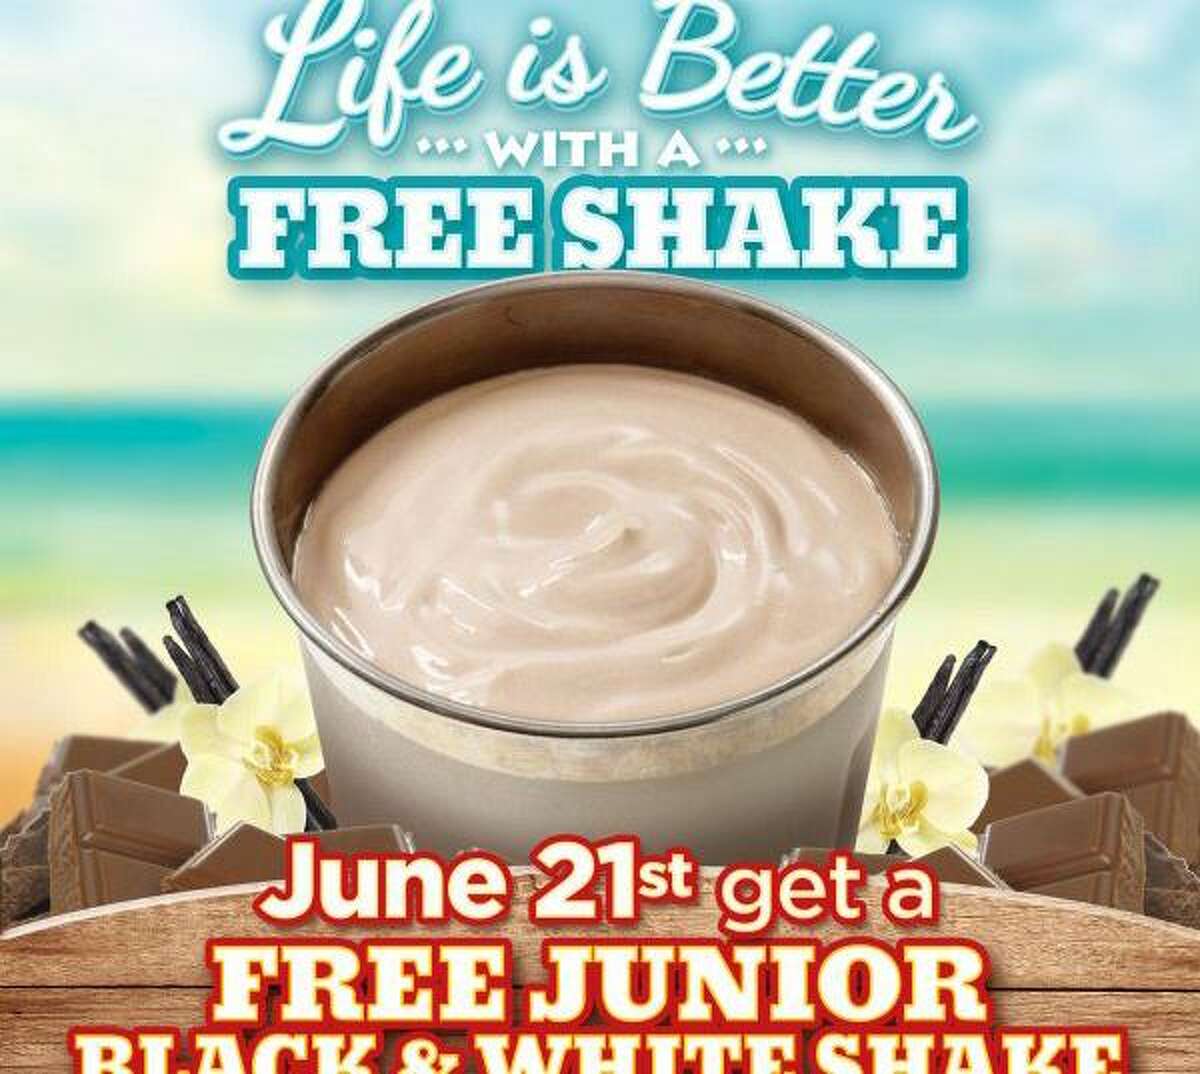 A 2015 promotion for Wayback Burgers' "Free Shake Day".